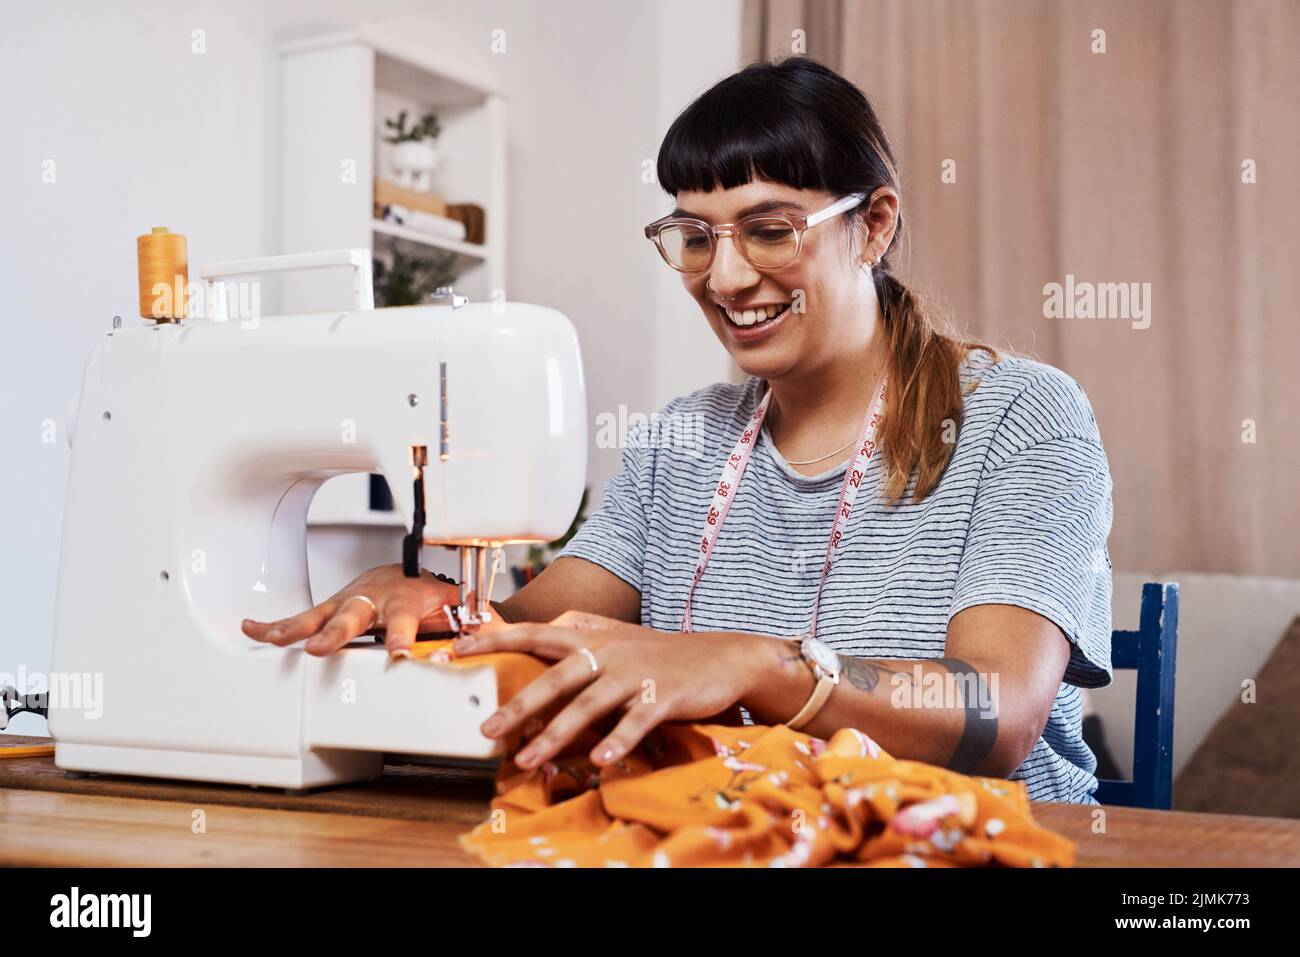 I have my own style therefore I design my own clothes. a young woman stitching fabric using a sewing machine at home. Stock Photo